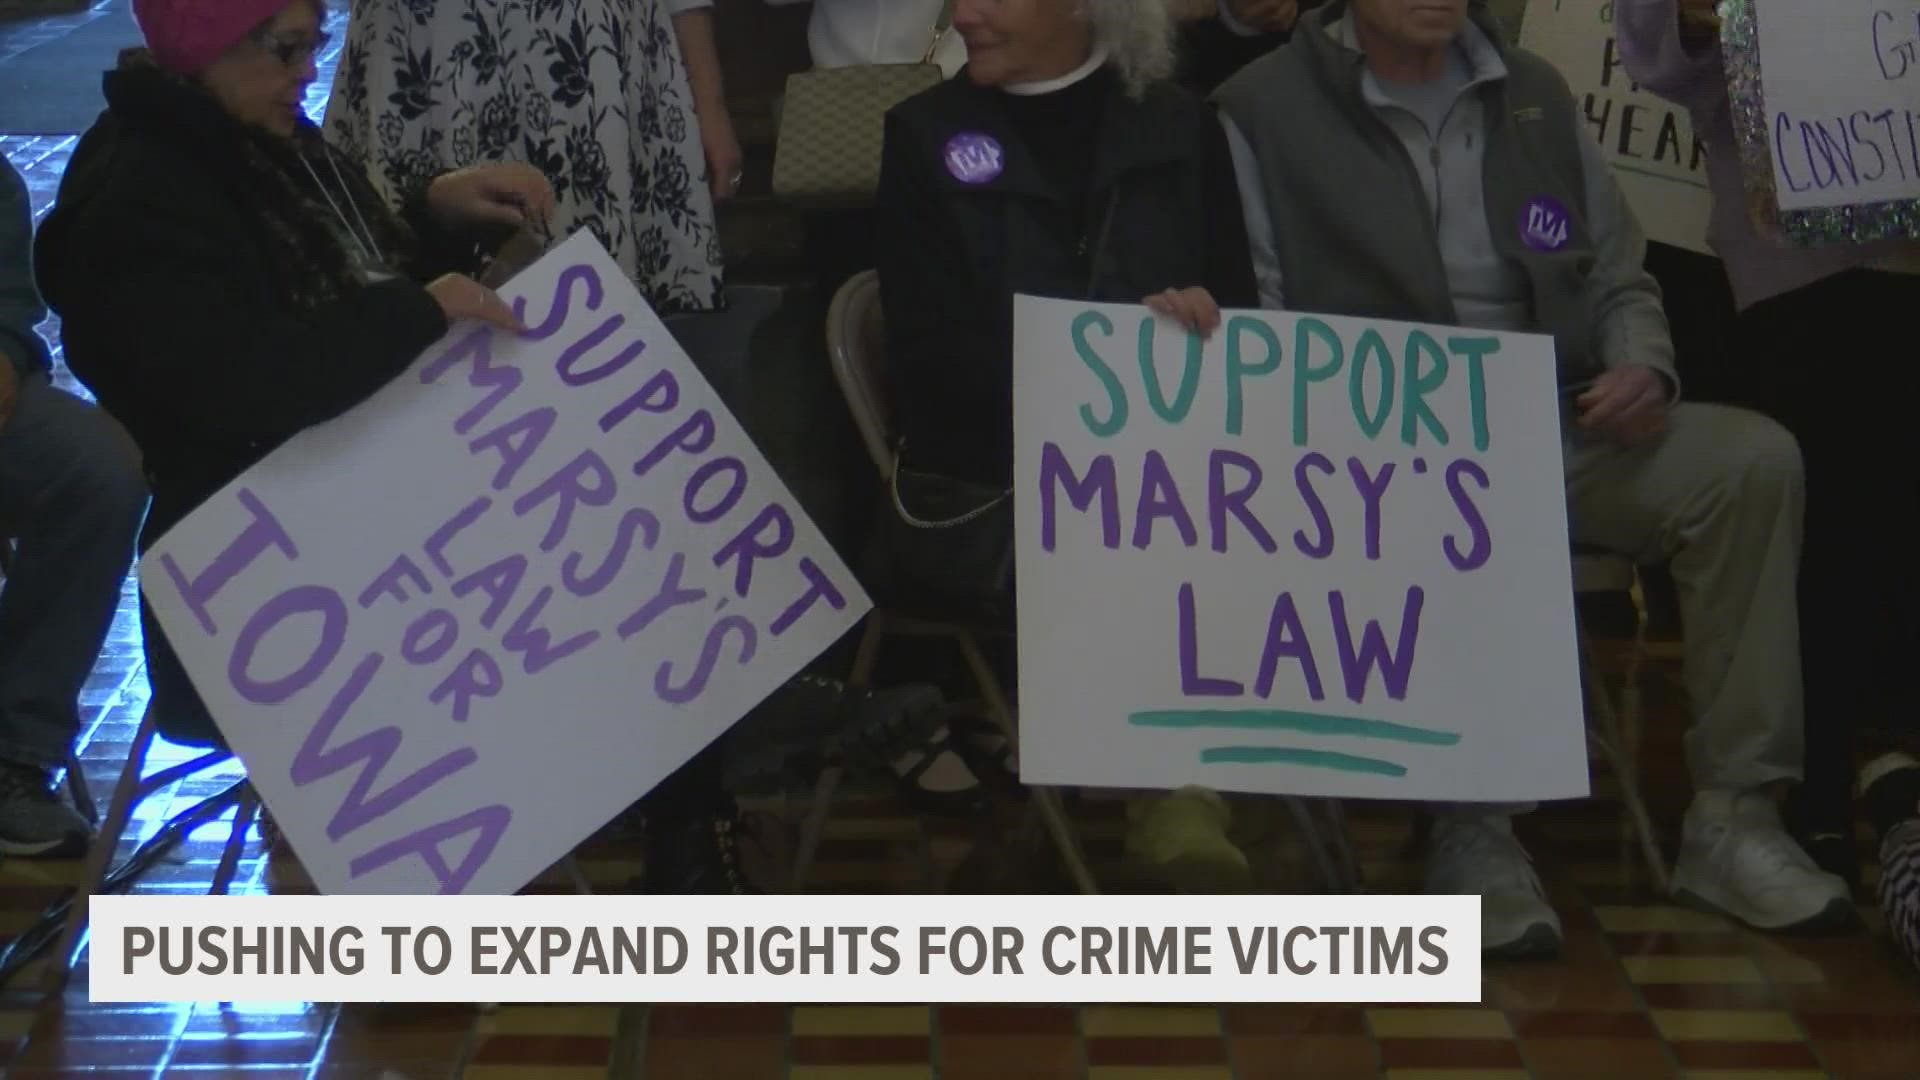 The bill would add rights for crime victims as an amendment to the Iowa constitution.